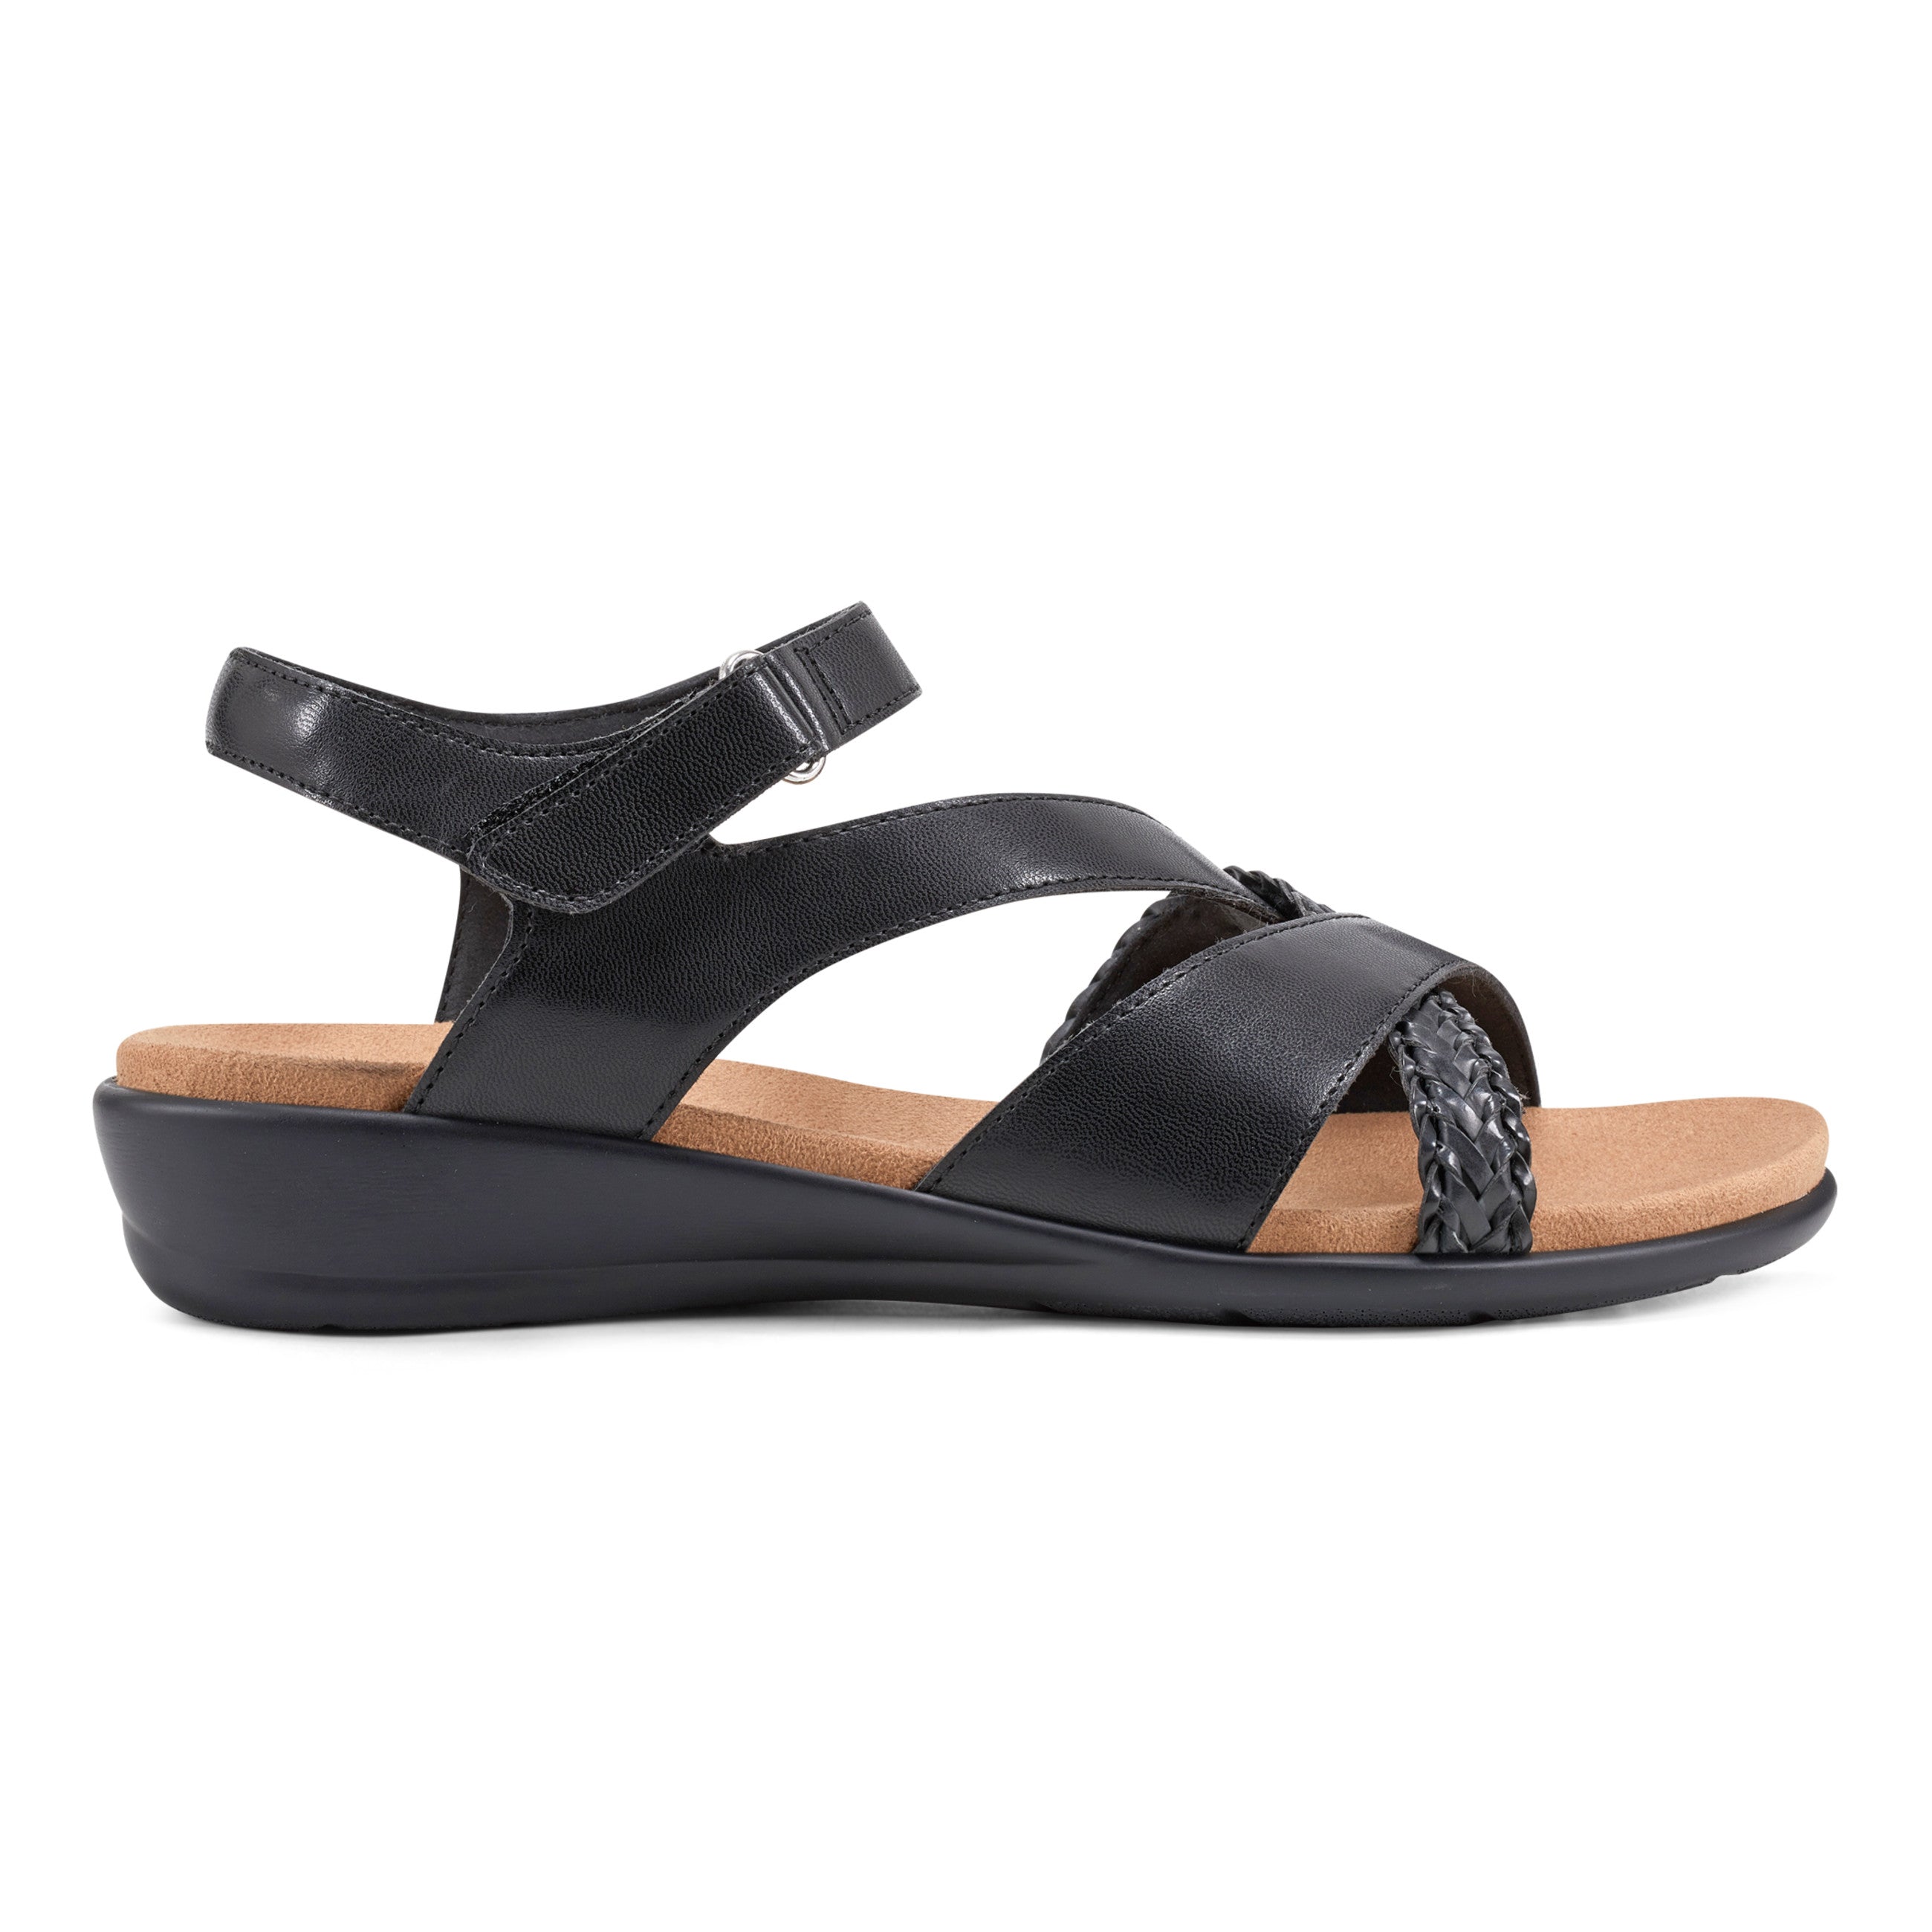 Hart Open Toe Strappy Casual Sandals